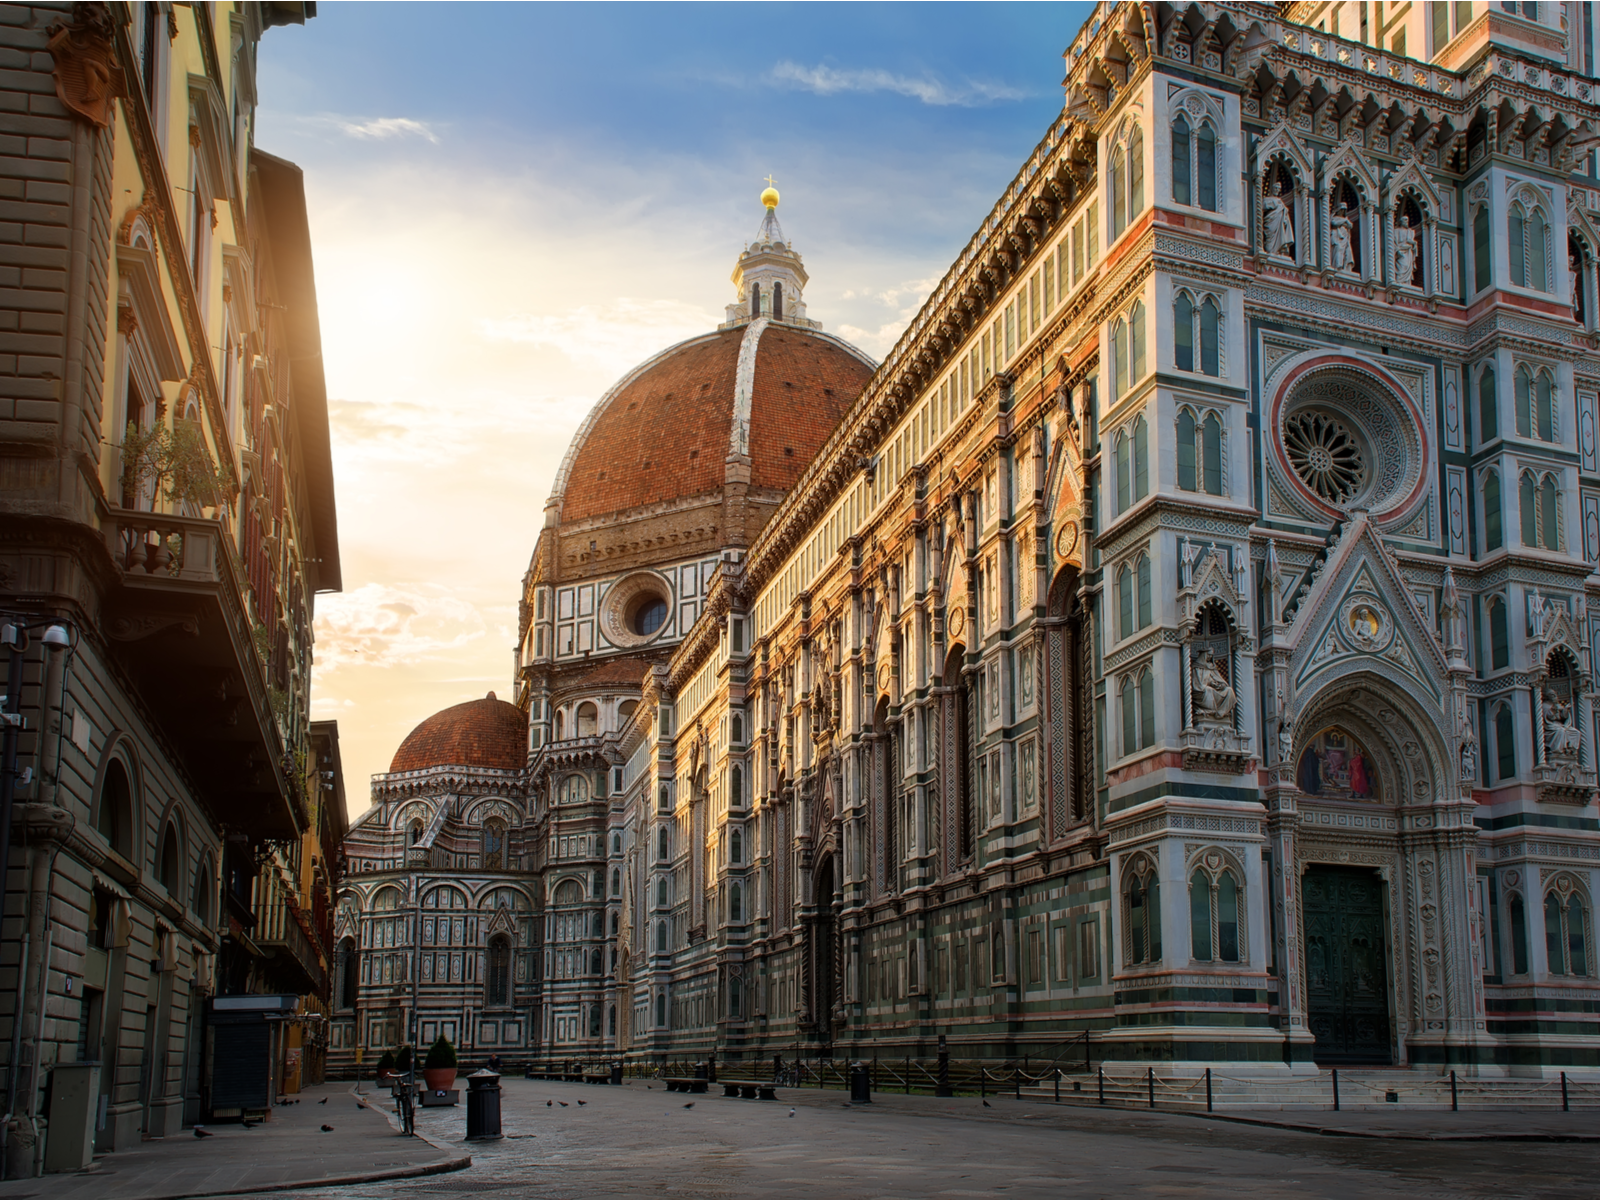 Piazza del Duomo, one of the best places to visit in Italy for museums and gorgeous architecture